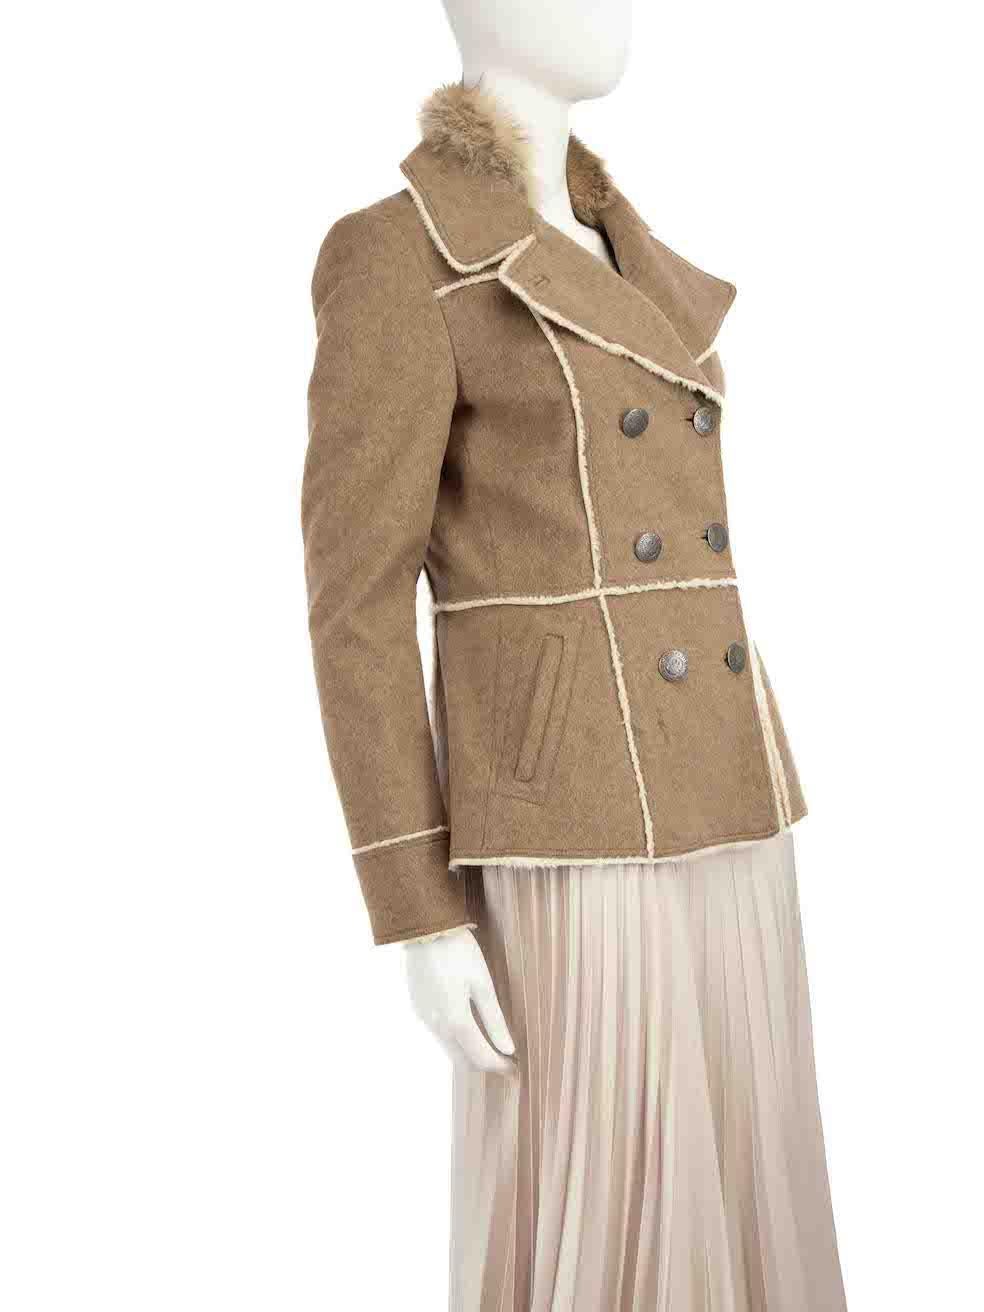 CONDITION is Very good. Minimal wear to coat is evident. Minimal wear to the exterior with thinning to the texture on this used Prada Sport designer resale item.
 
 Details
 Beige
 Wool
 Short length coat
 Double breasted
 Fur trim detail on